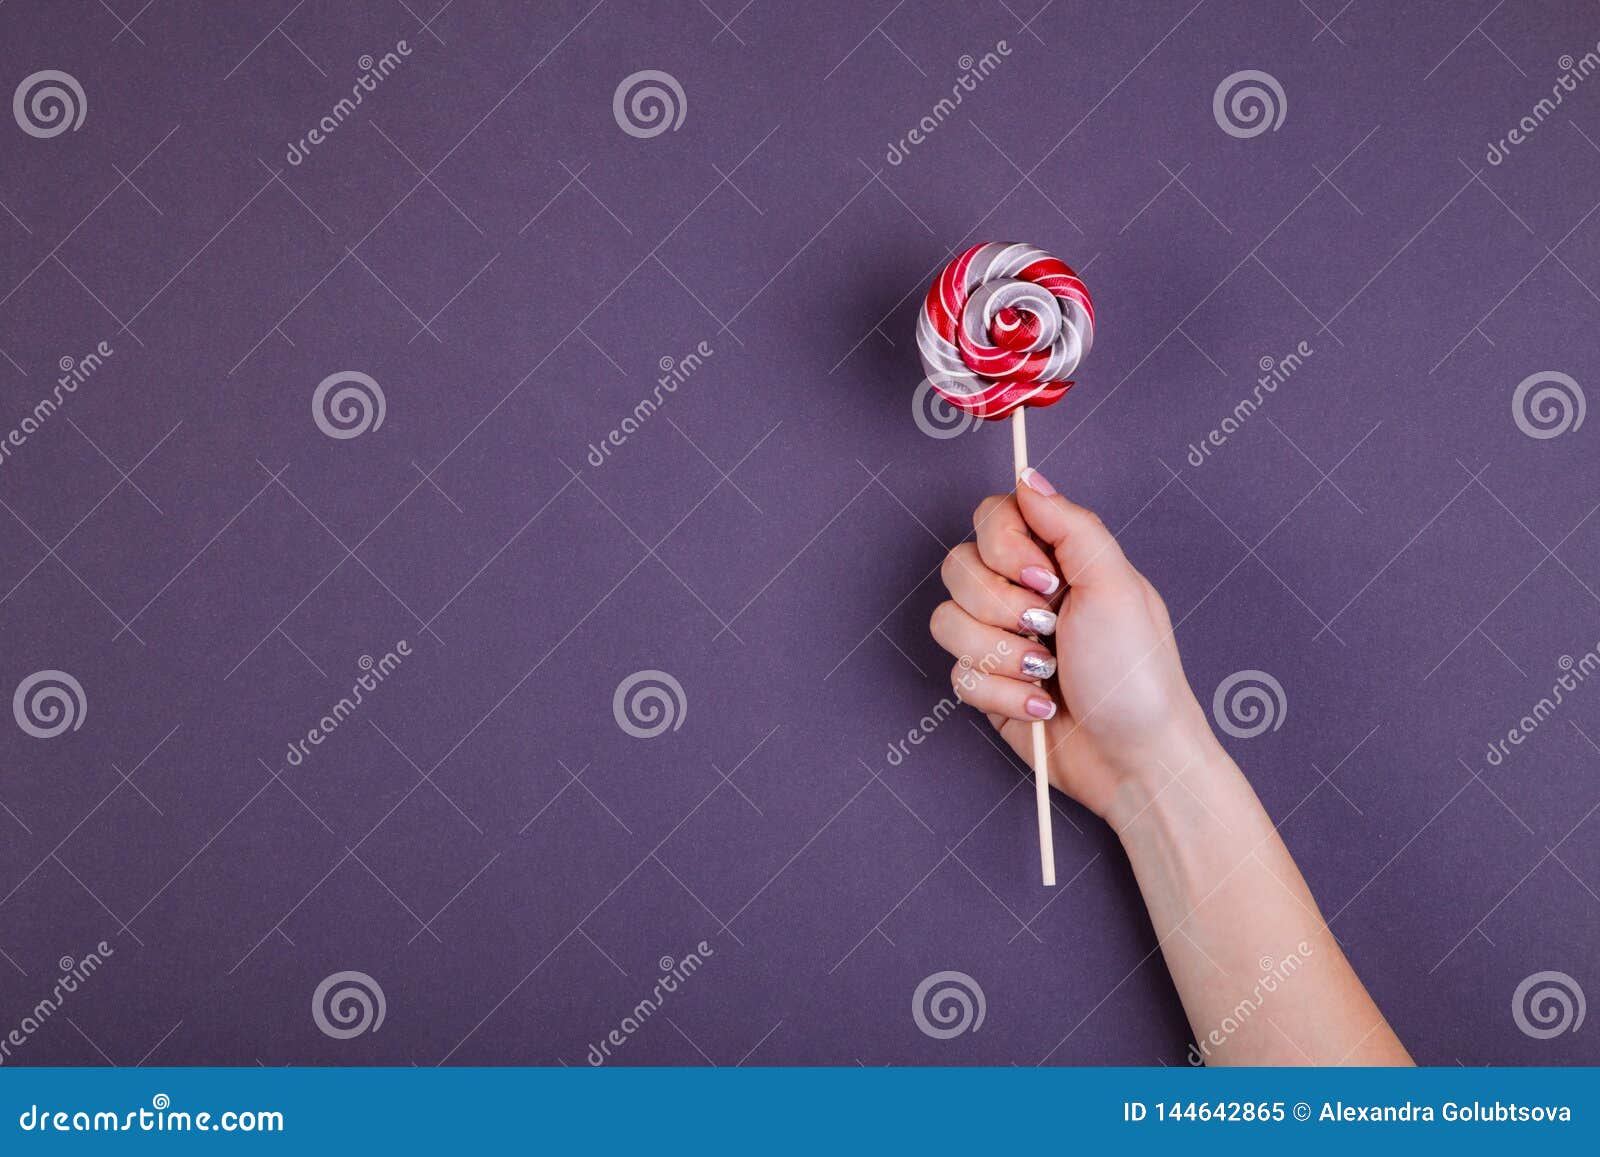 Lollypop on a Stick in Hand. Stock Image - Image of color, decoration ...